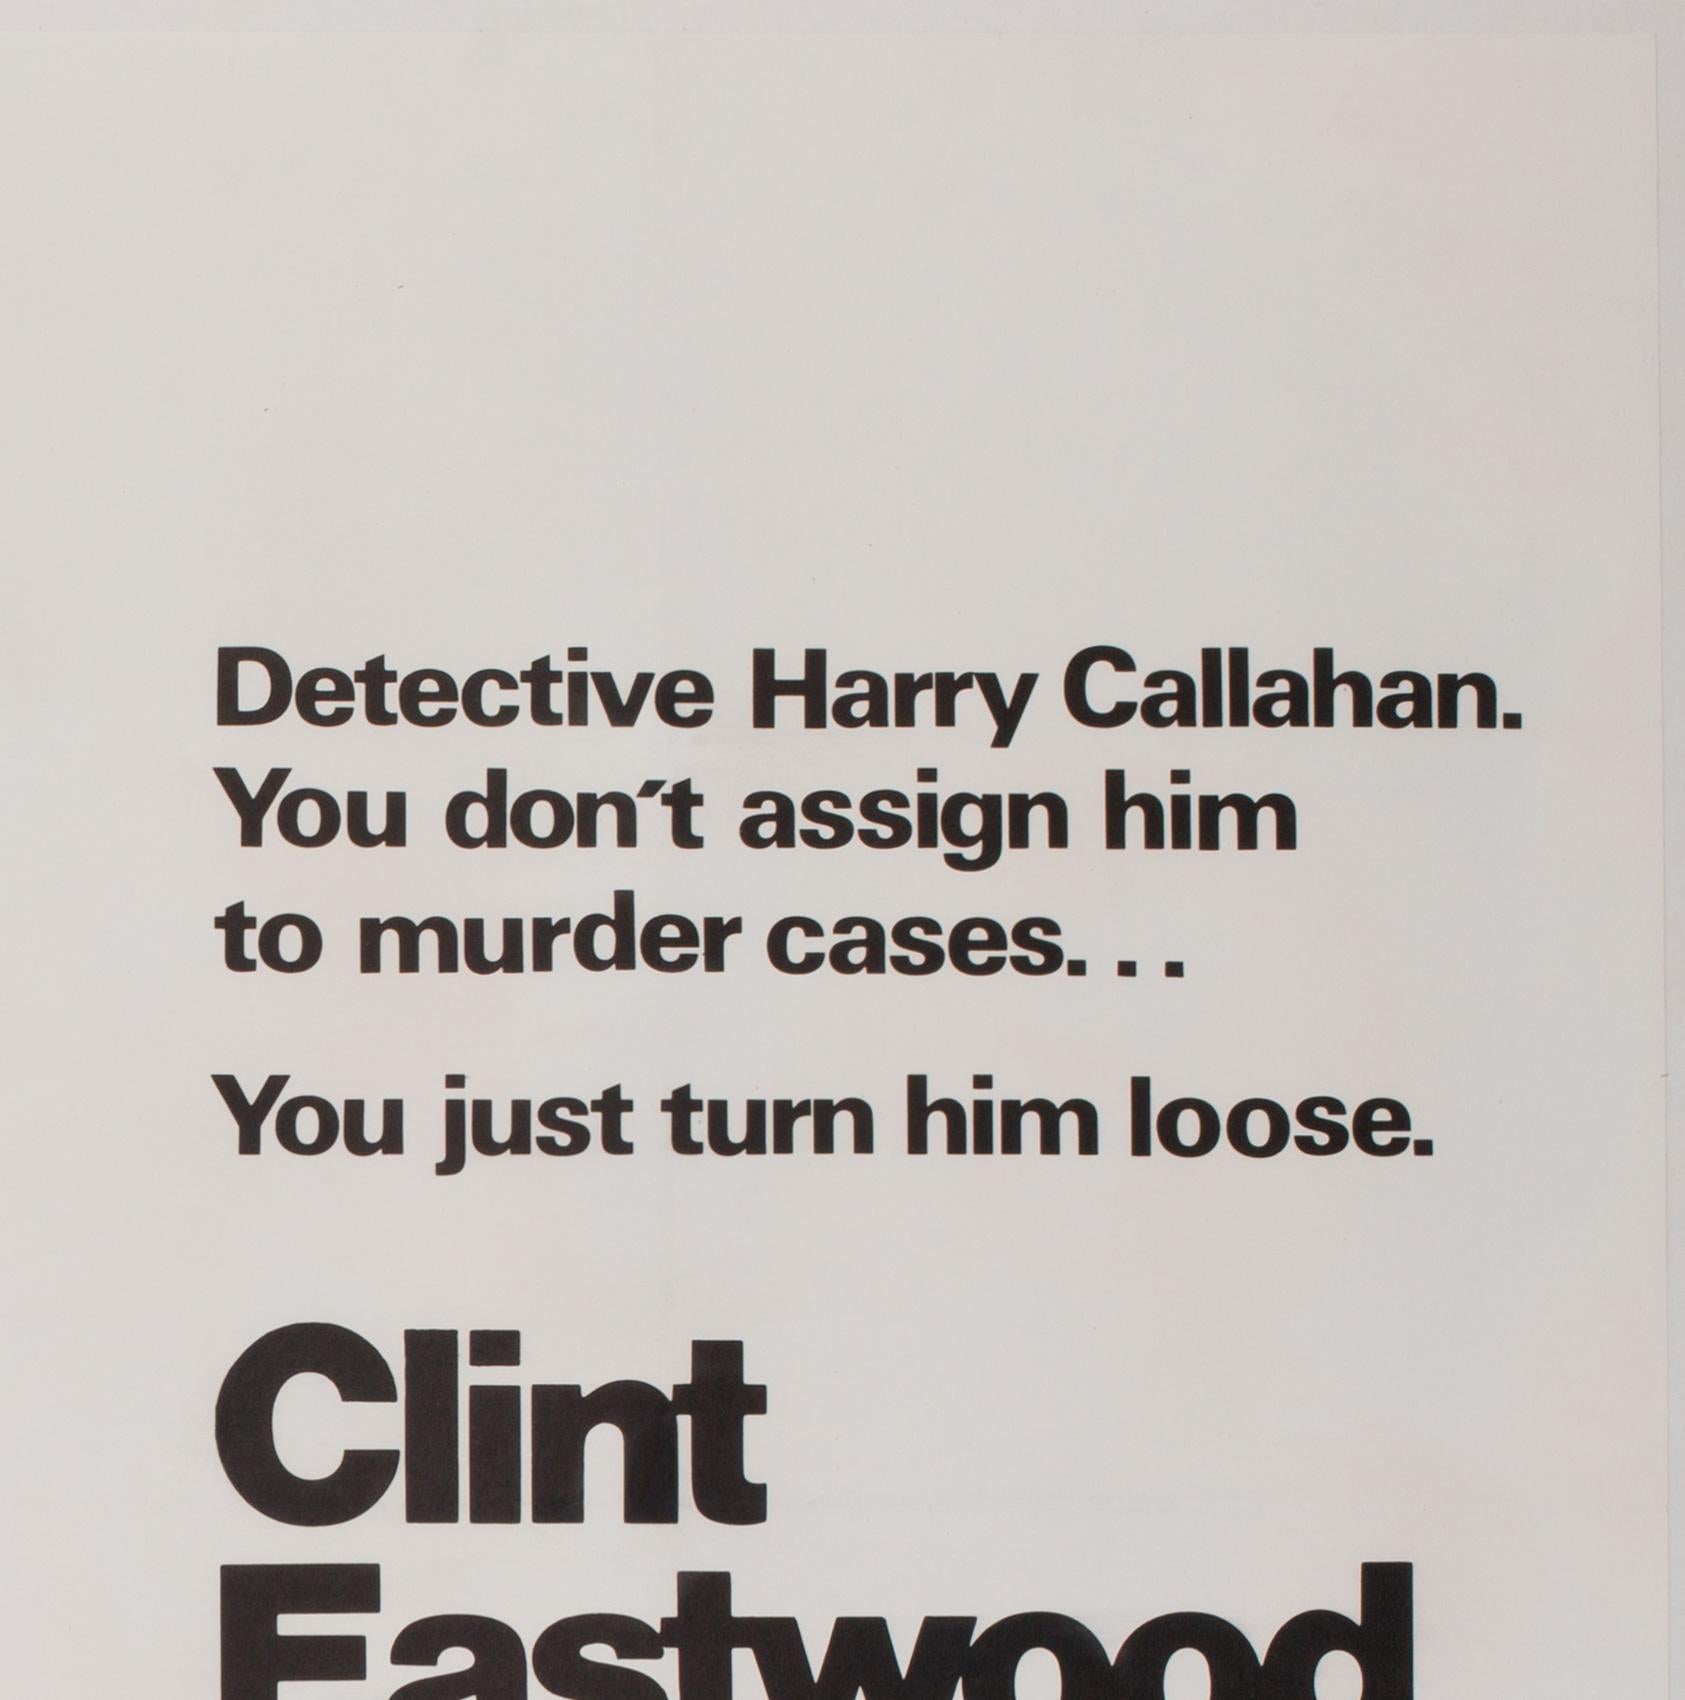 The very cool first-year-of-release UK Quad film poster for Don Siegel's Classic 1970s thriller movie Dirty Harry, starring Clint Eastwood in one of his most iconic roles. Wonderful graphics.

Any owner of this would feel like one lucky